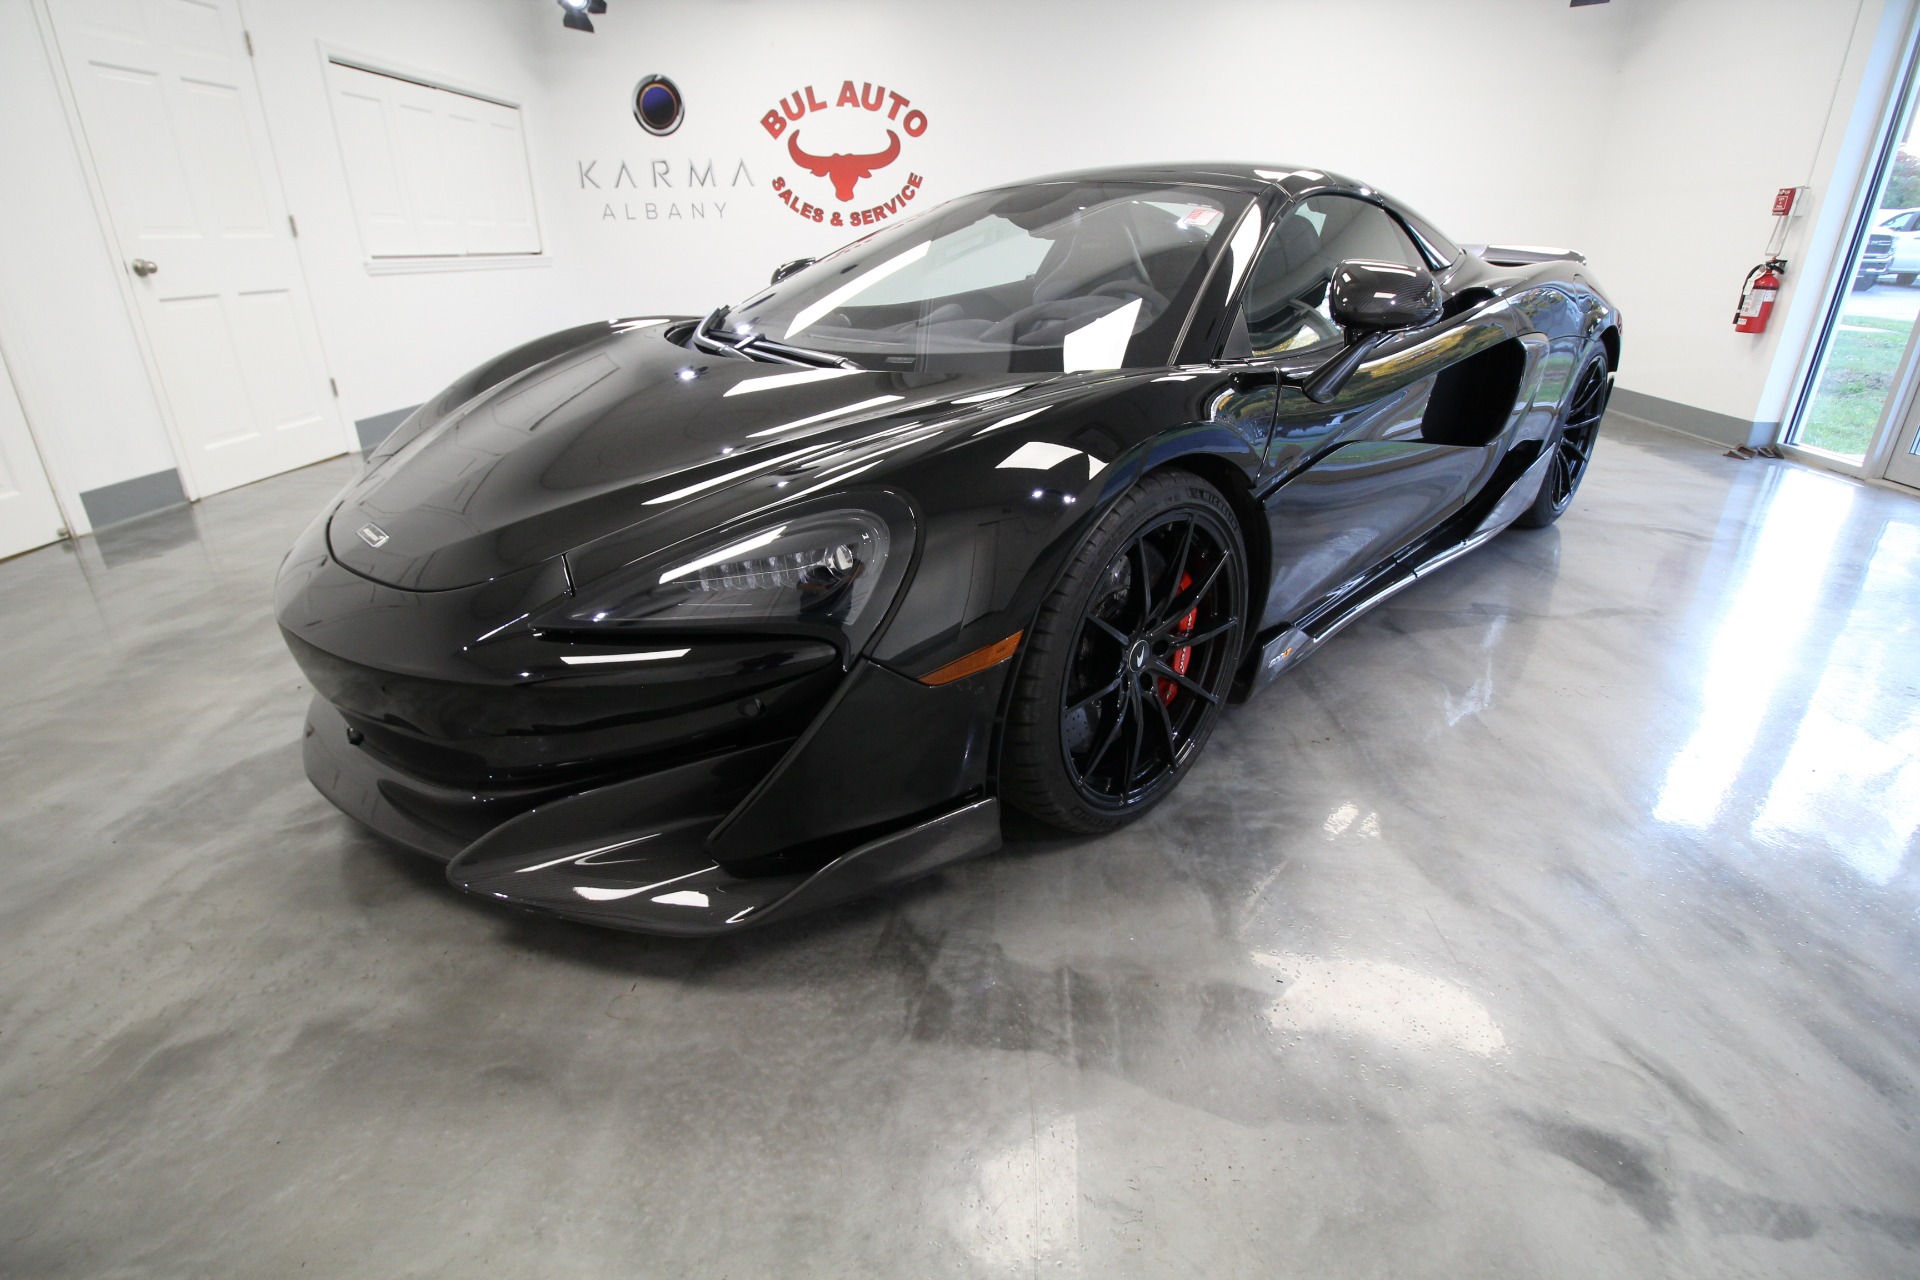 Used 2020 Onyx Black McLaren 600LT Spider Lots of Carbon Fiber - Low Miles | Albany, NY